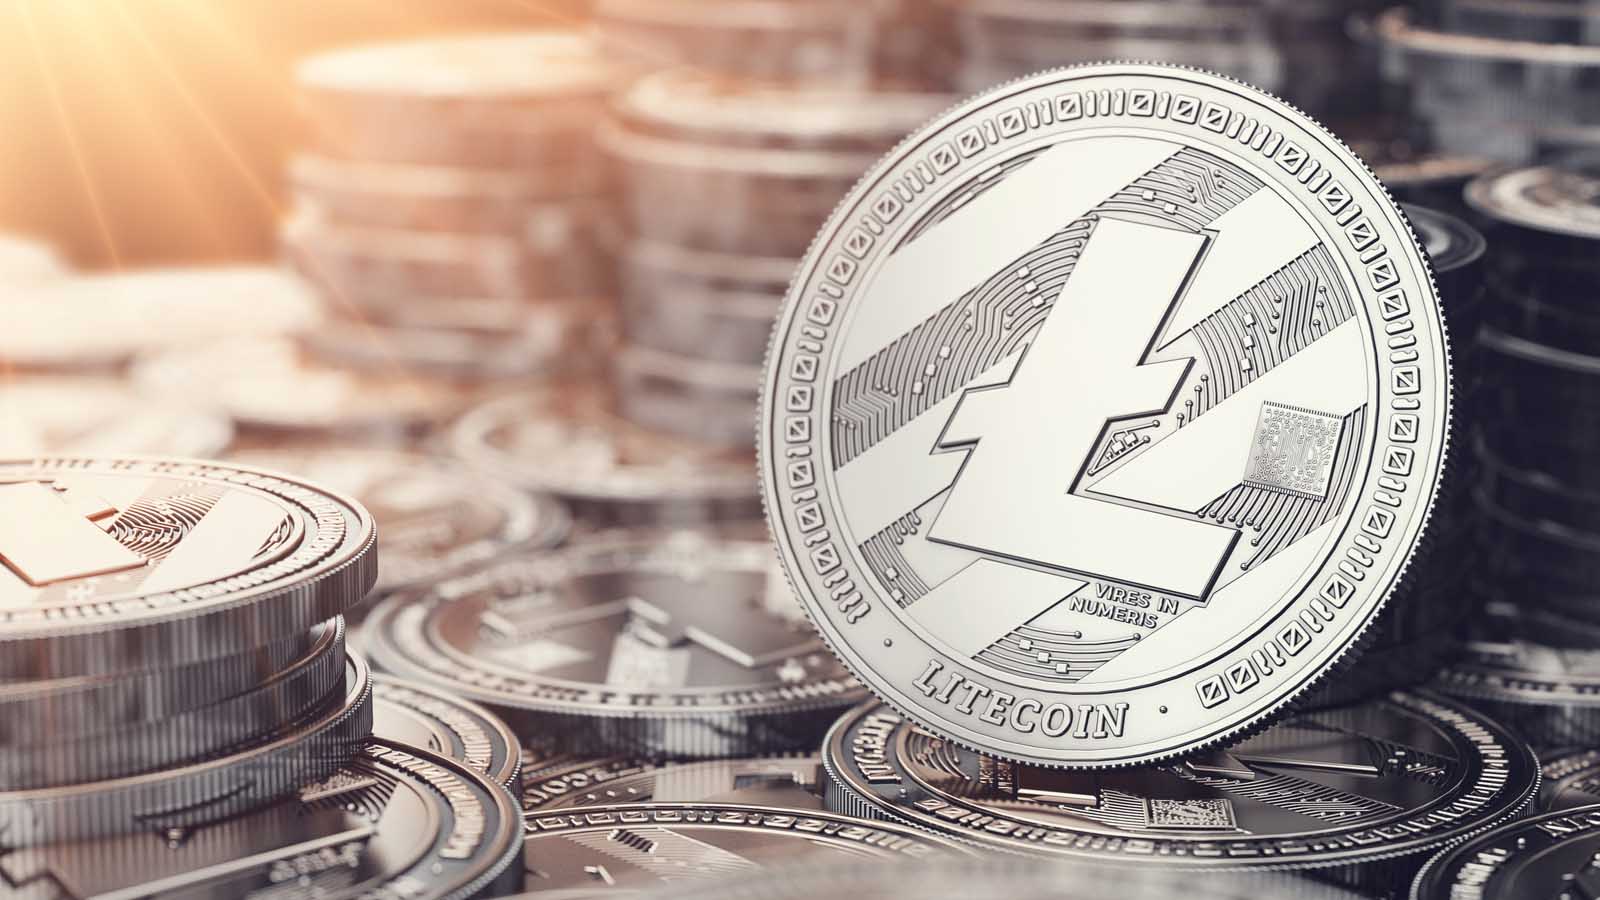 Image of one litecoin in front of many stacks of litecoins representing Litecoin Price Predictions.